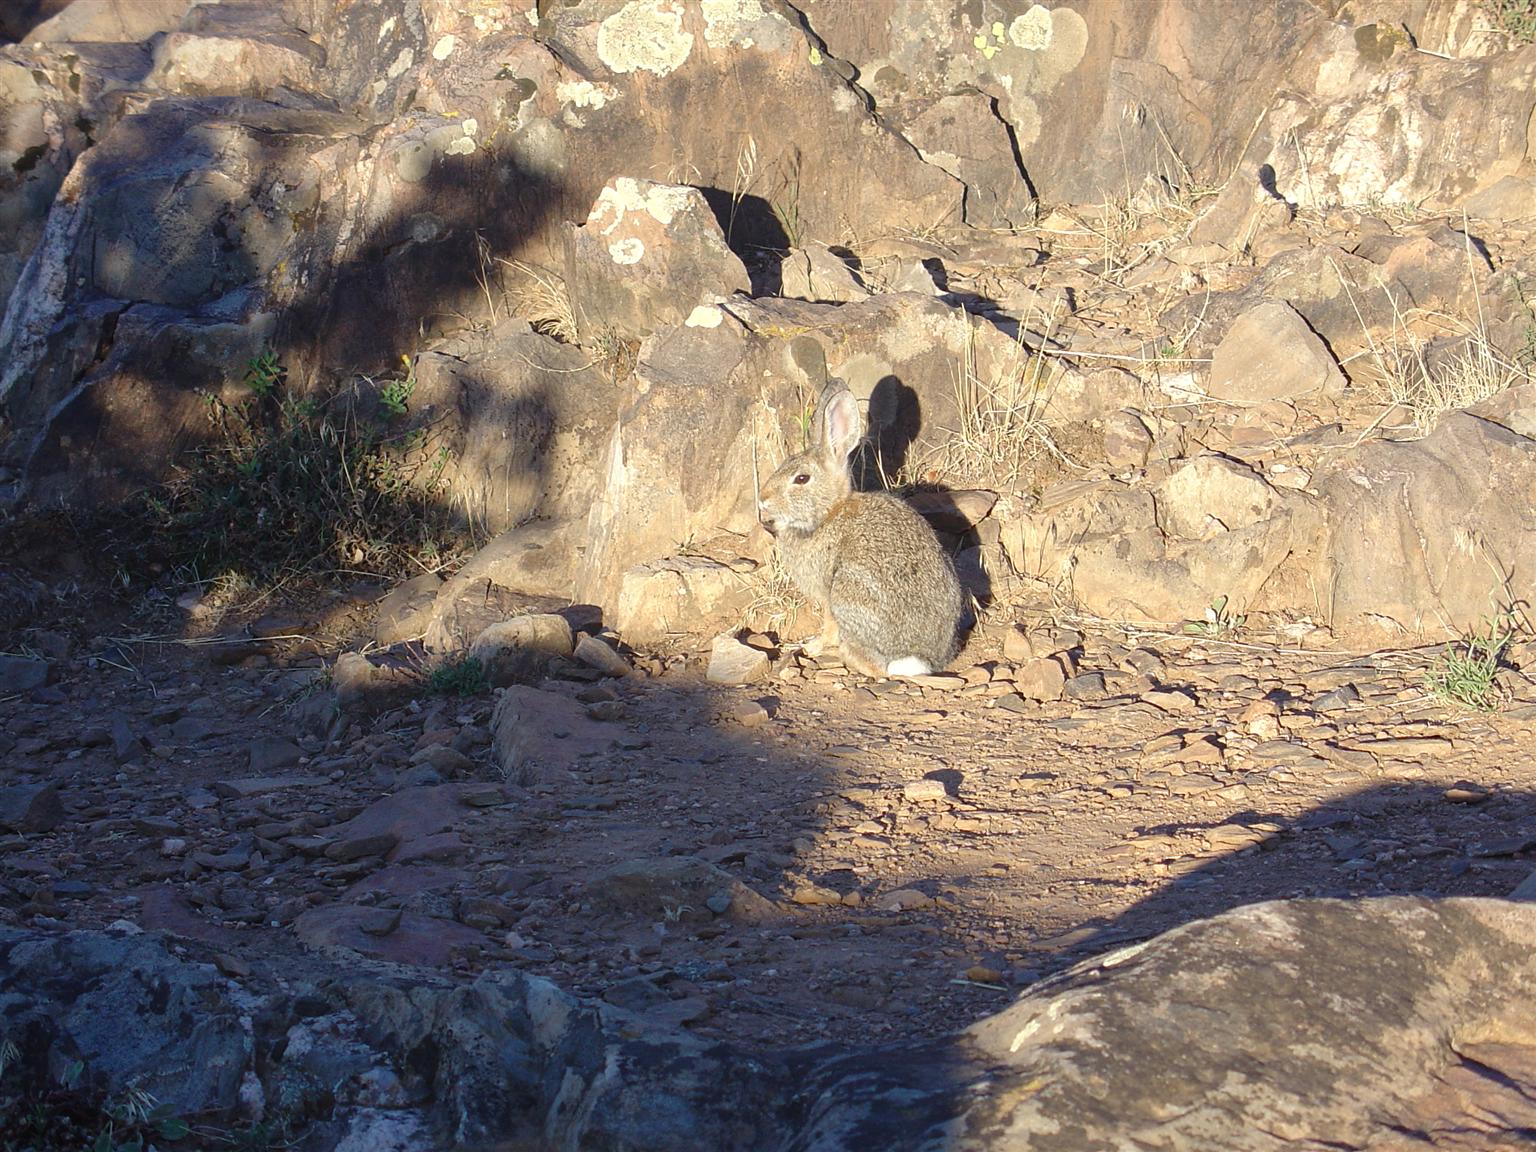 Colorado Rabbit that blends in with the rock colors